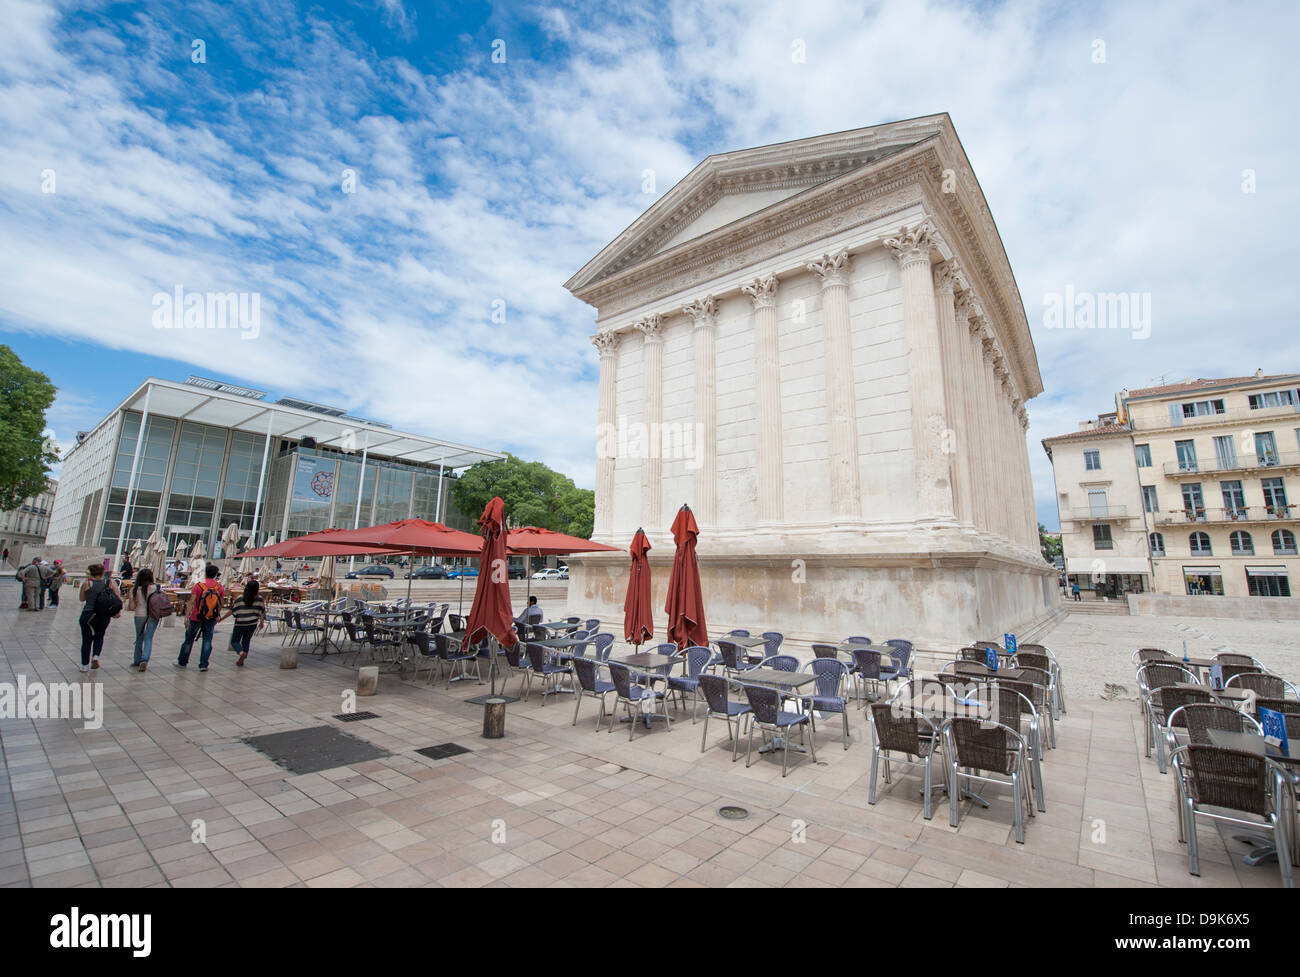 Maison Carrée, ancient roman temple, and modern Carrée d'Art by Norman Foster at Nîmes, Languedoc, France Stock Photo